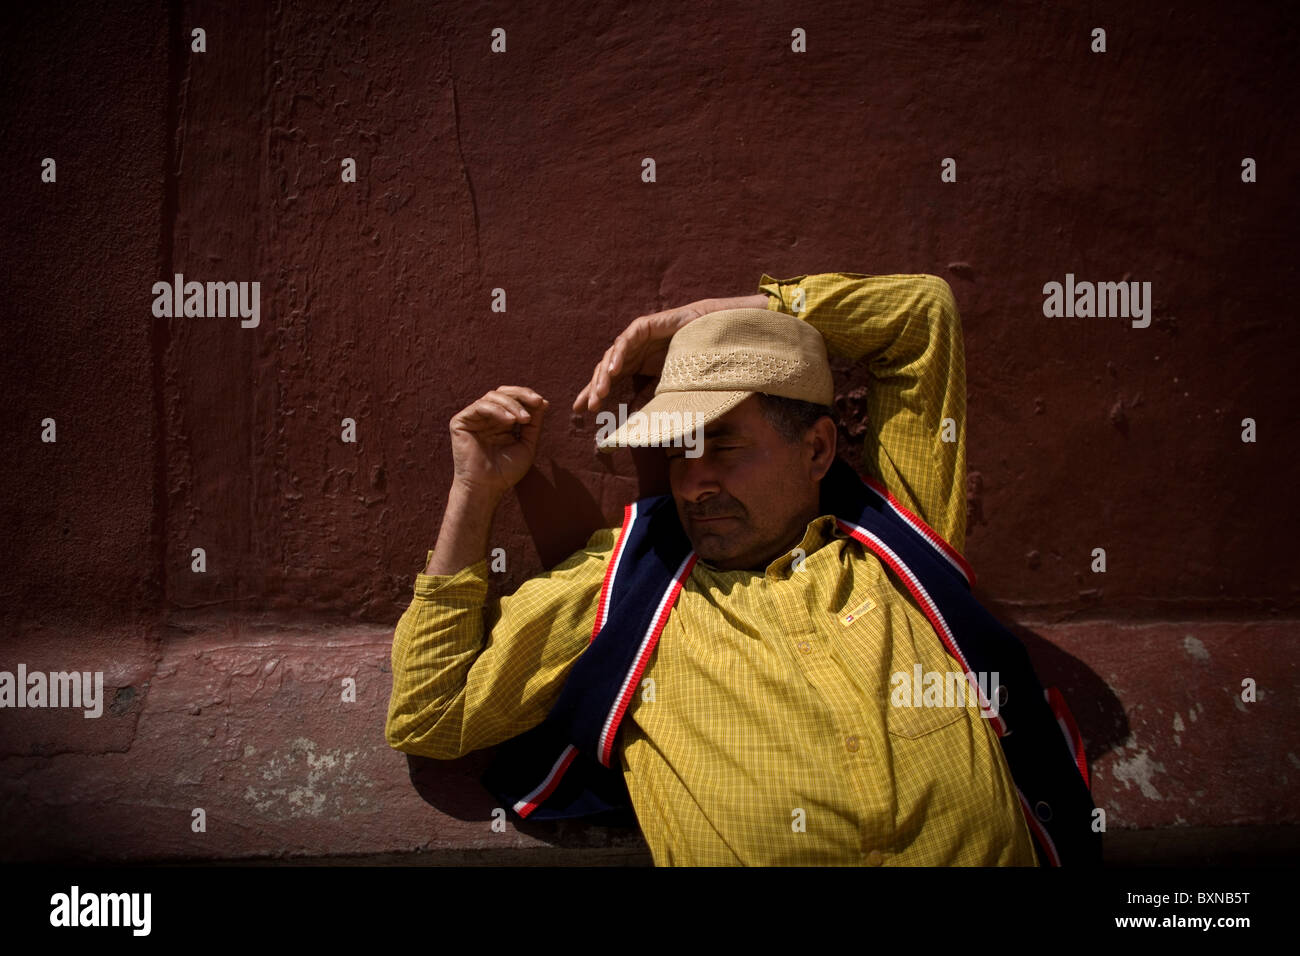 A Central American migrant traveling across Mexico to work in the United States sleeps in a shelter in Mexico City, Mexico Stock Photo